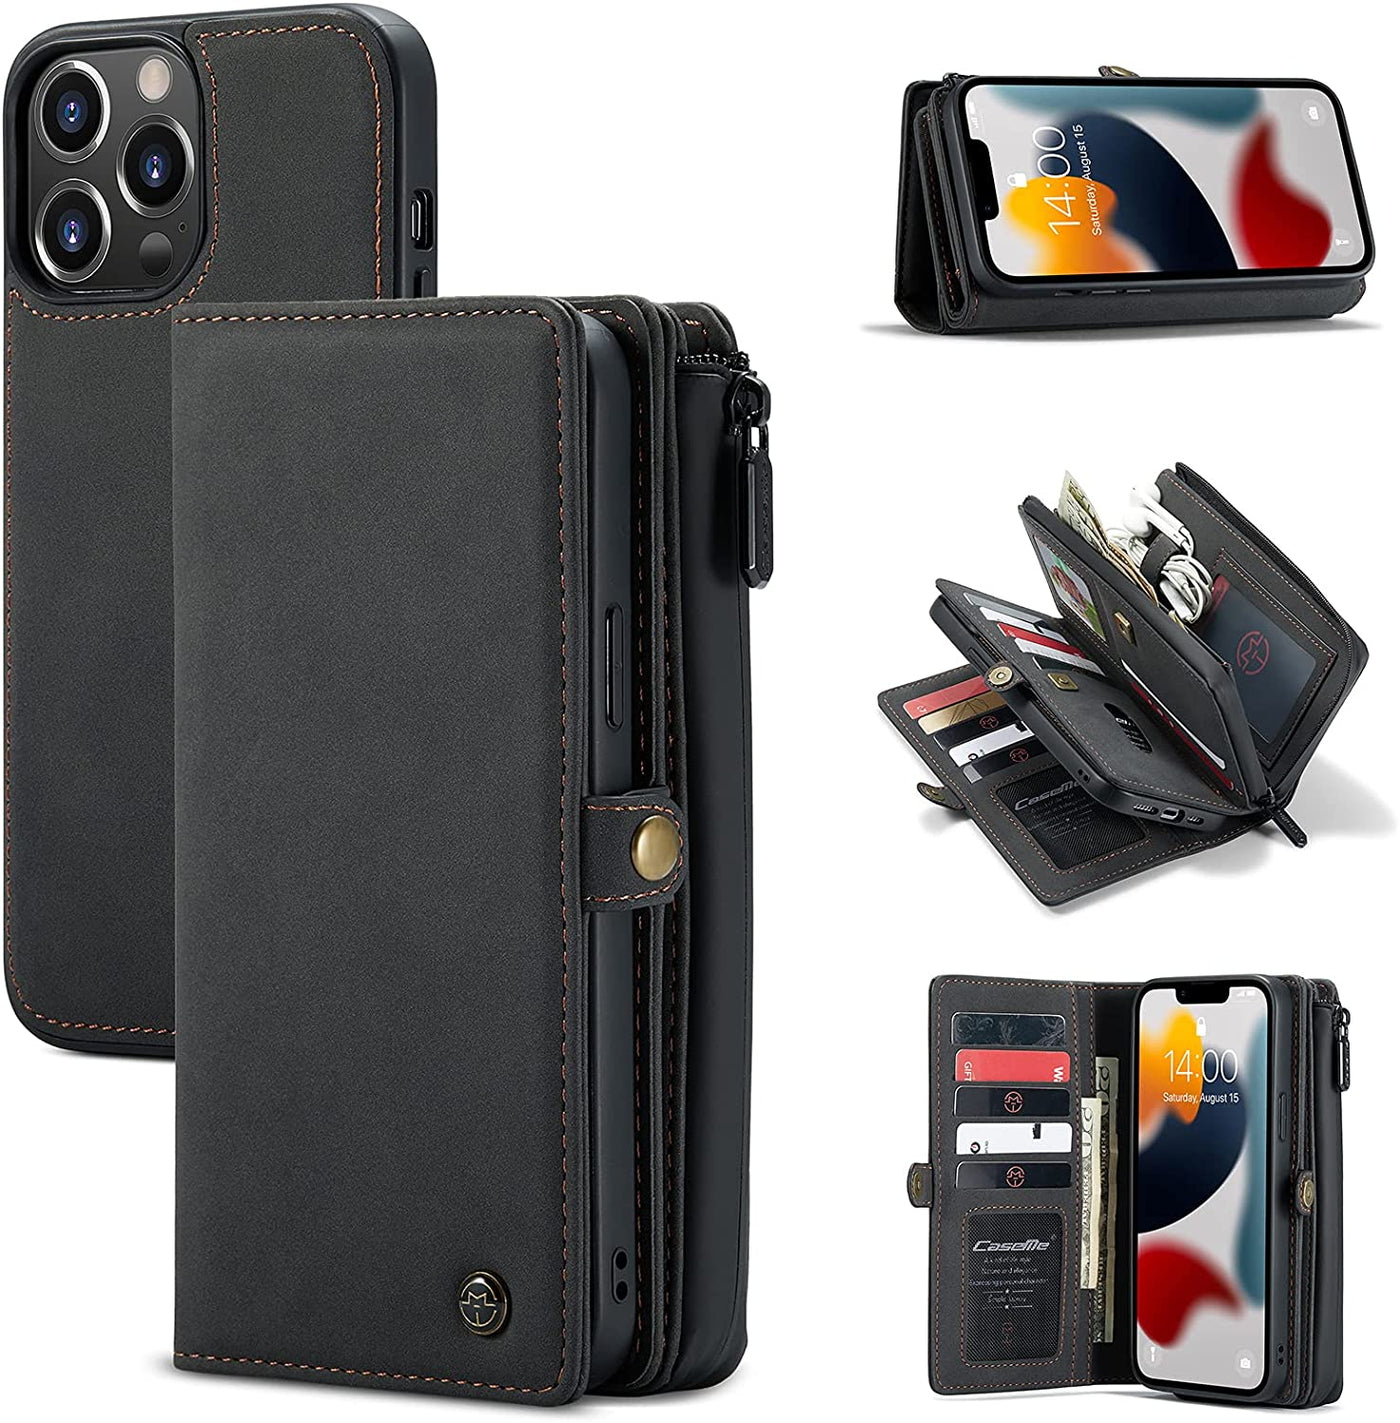 Excelsior Premium Multifunctional Leather Wallet Flip Cover Case For Apple iPhone 13 Pro Max